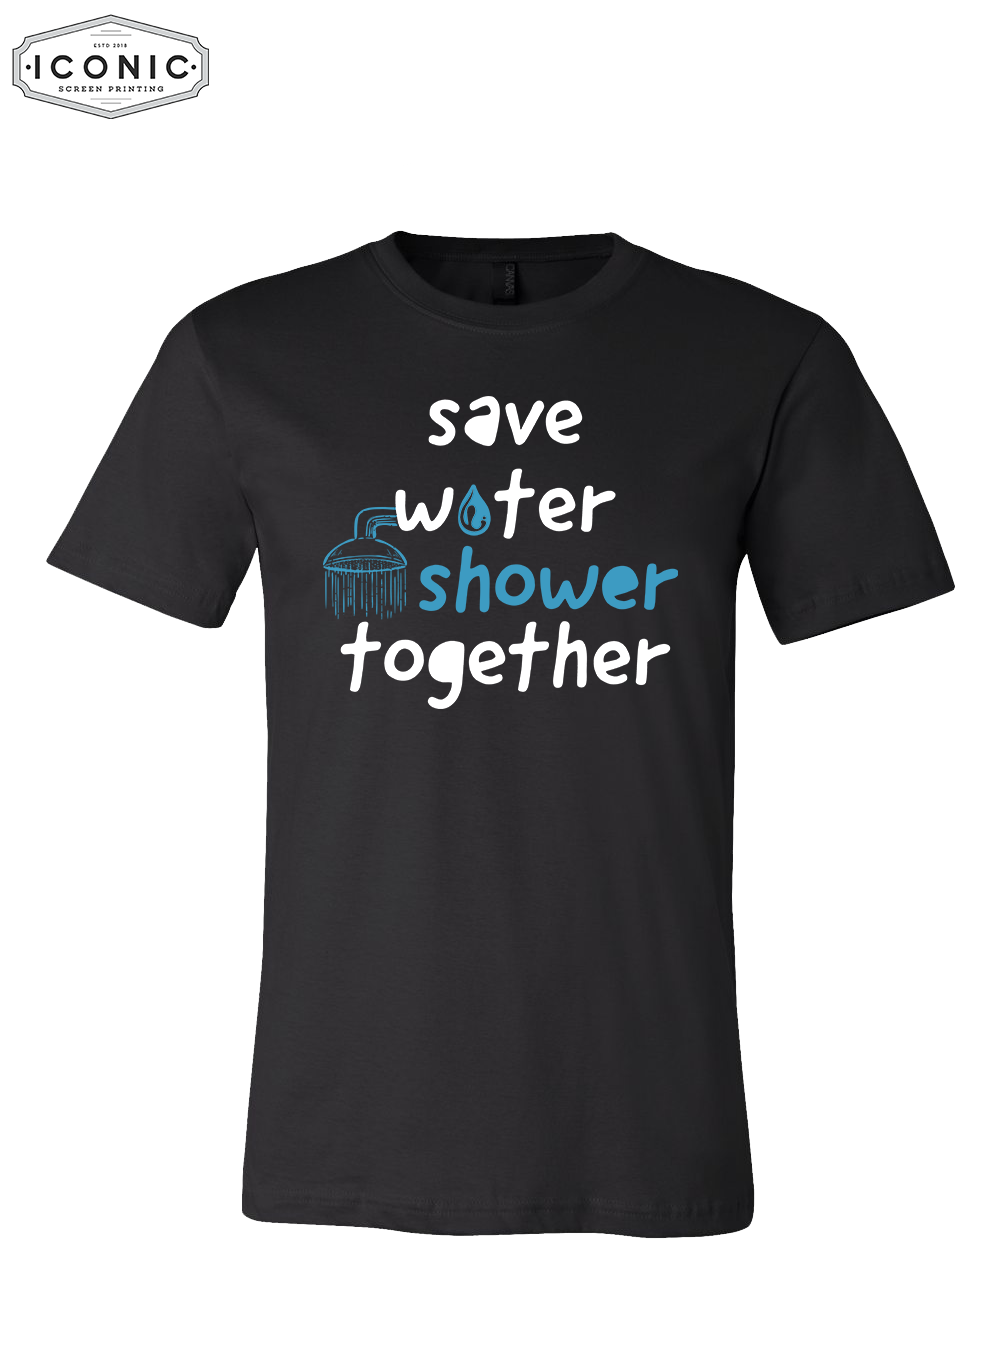 Save Water Shower Together - D6 - BELLA+CANVAS - Jersey Tee